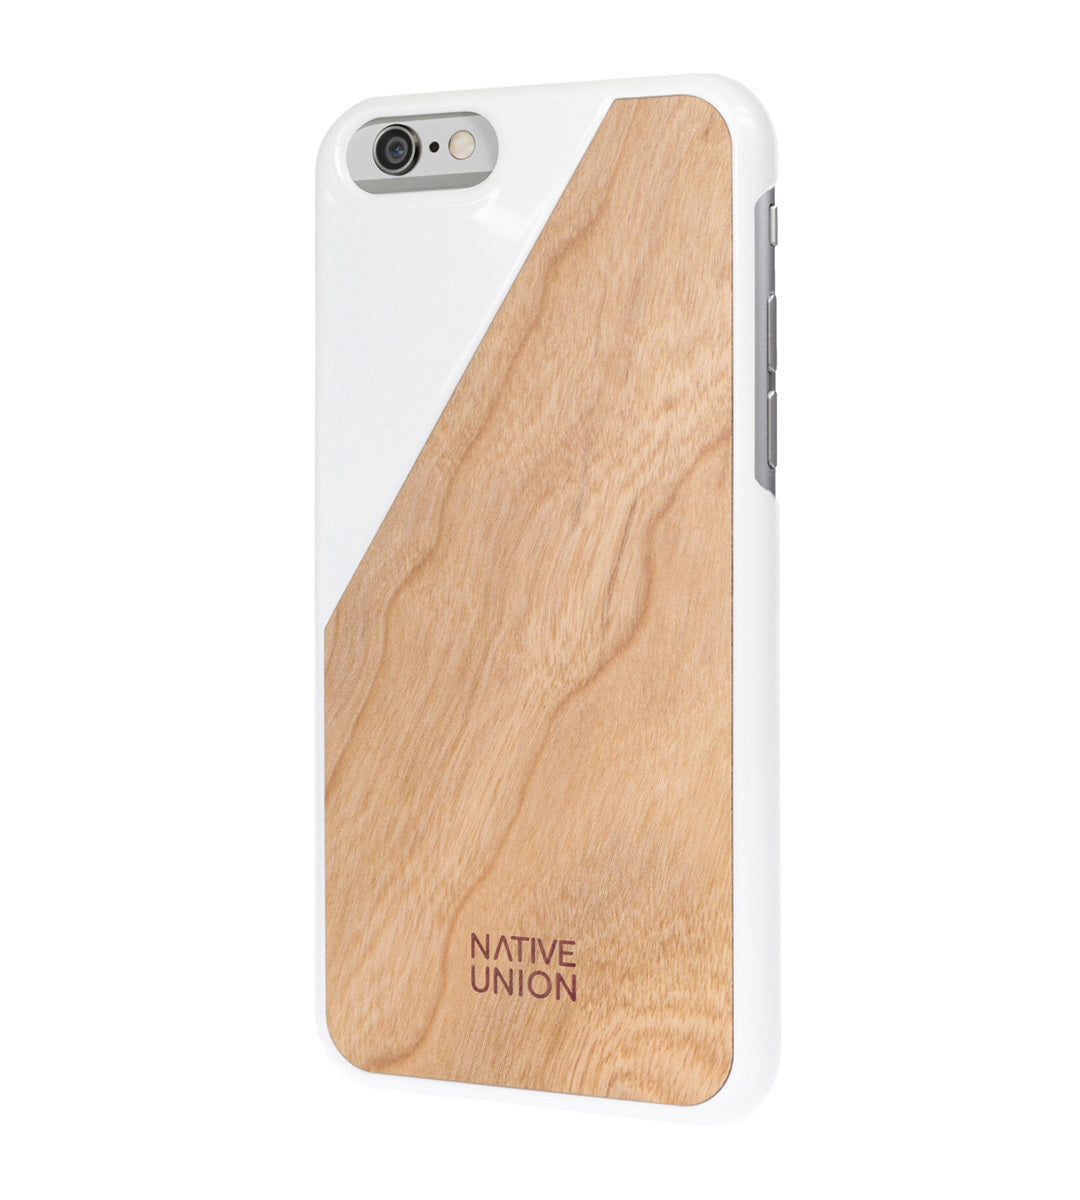 Genuine Native Union Clic Wooden for iPhone 6/6s/7 - White New